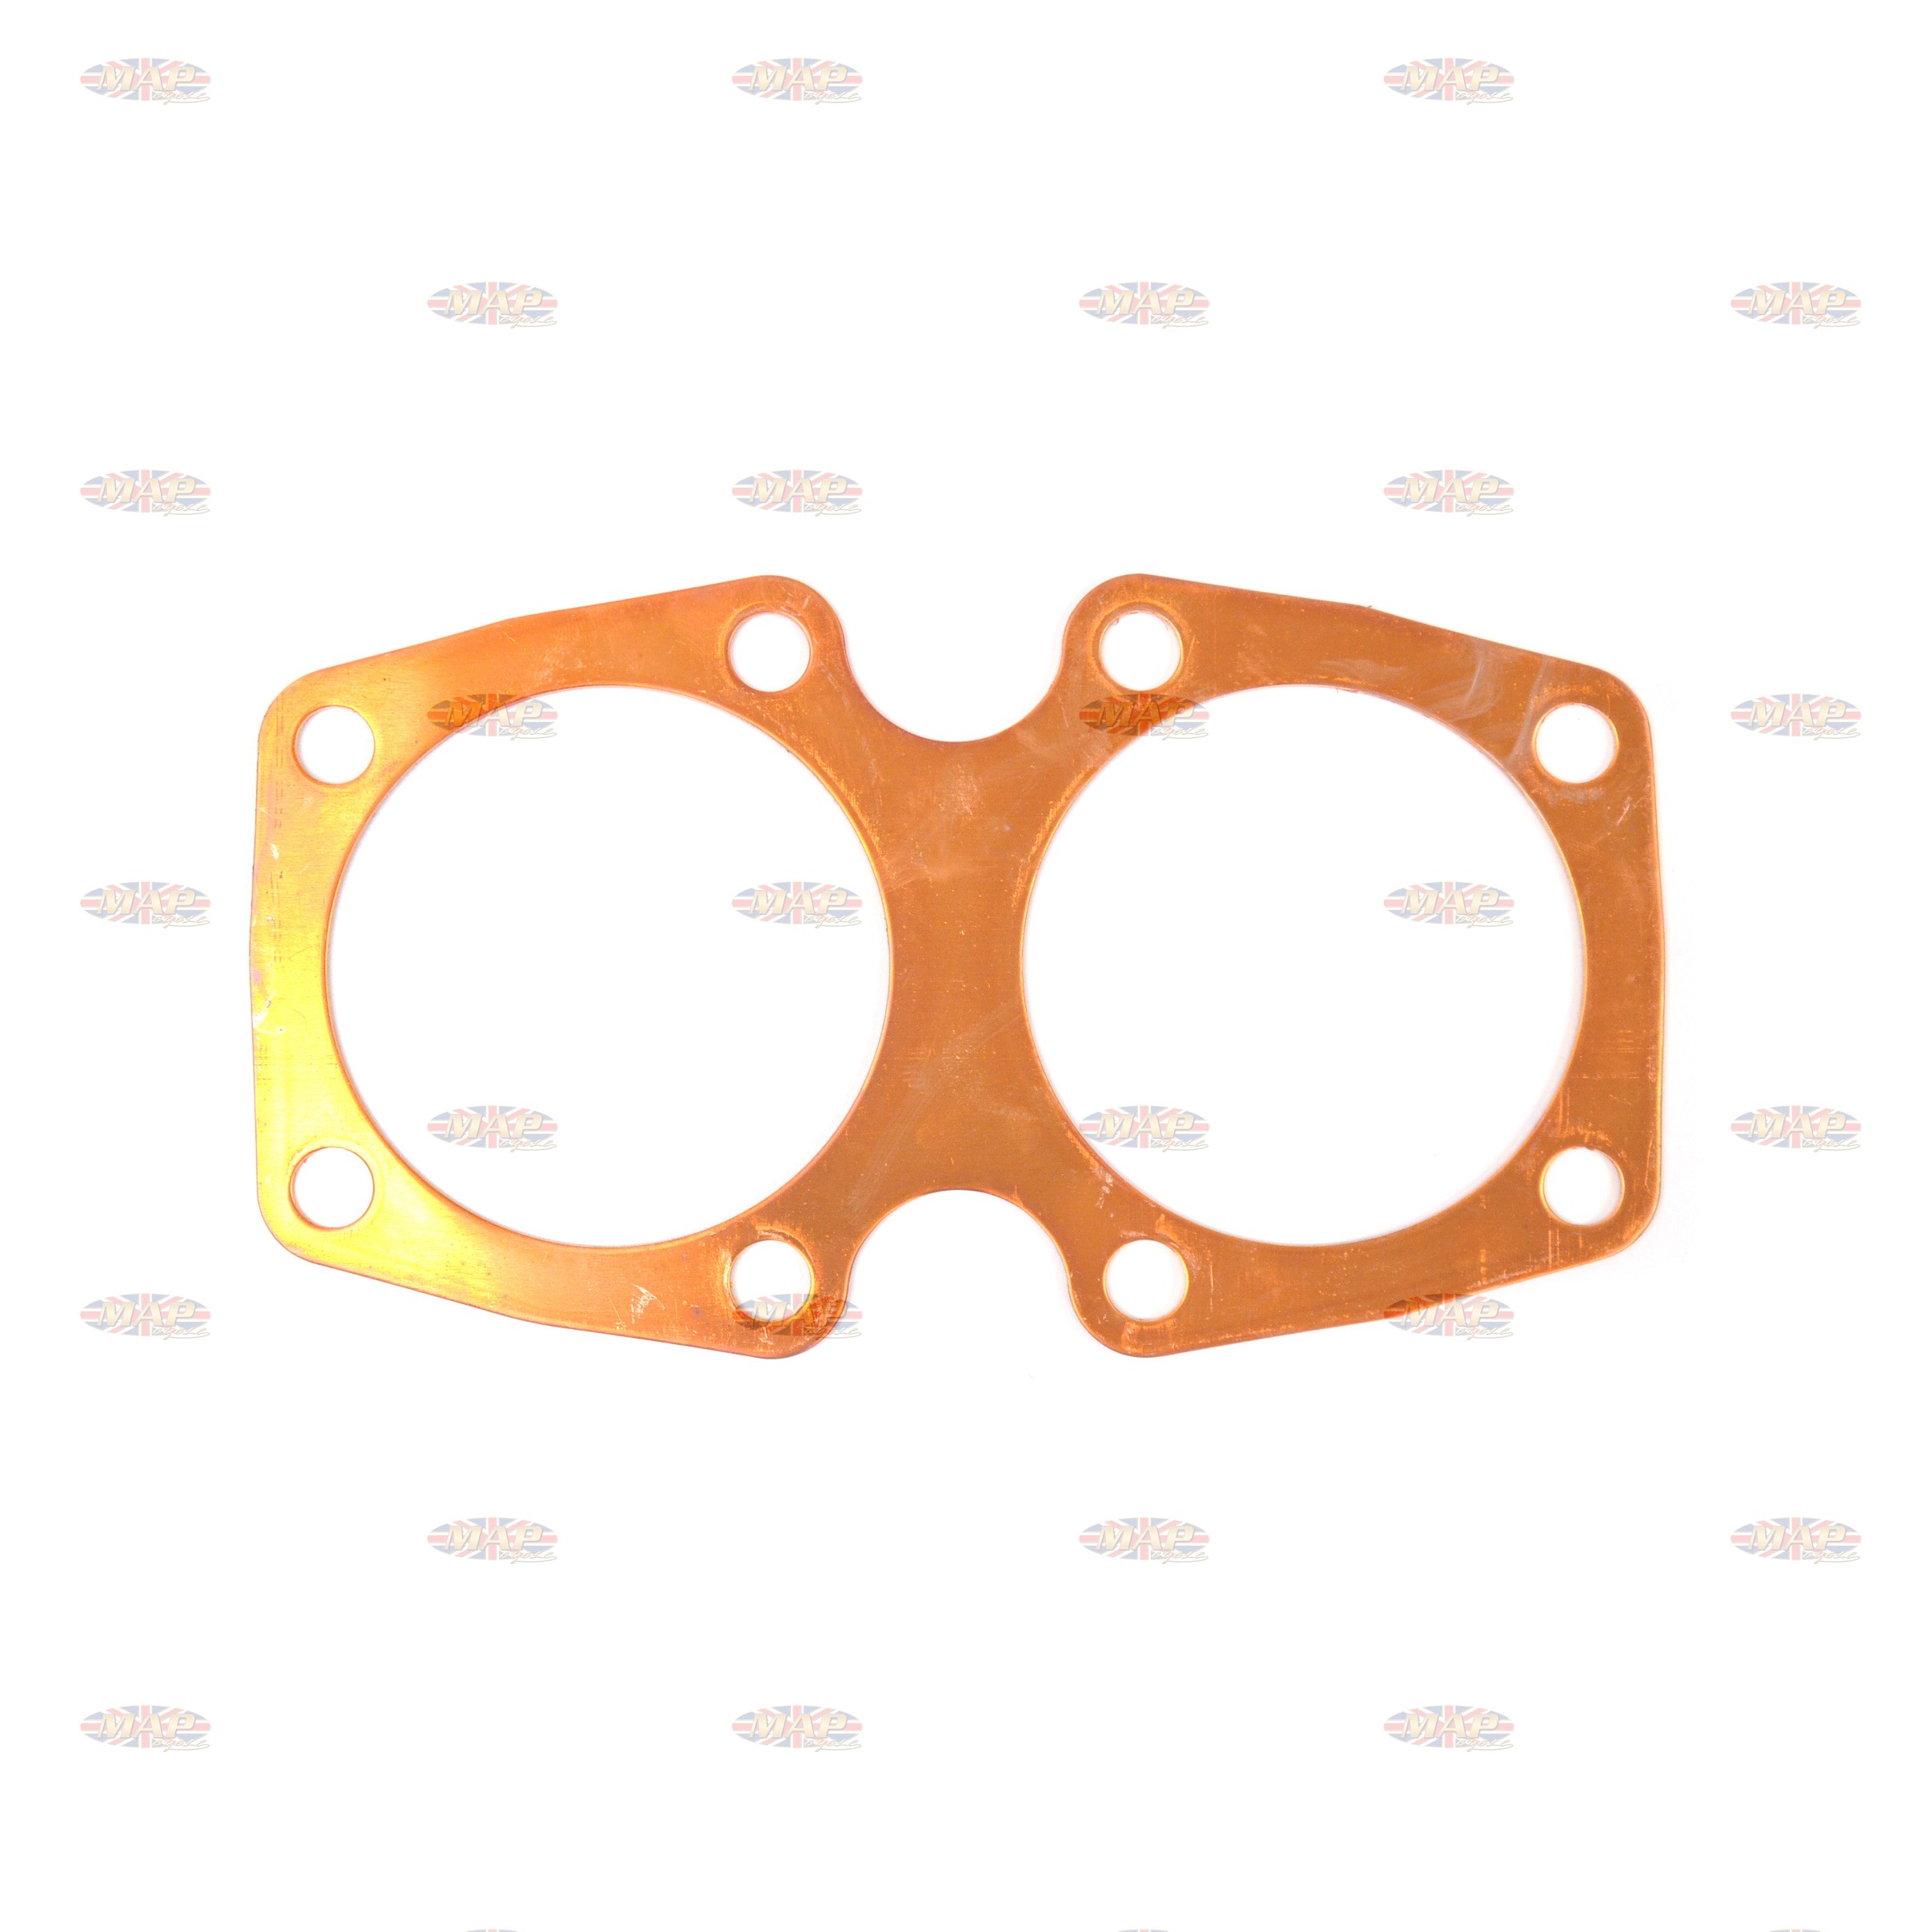 Triumph Early T100 English-Made, Best Quality, Copper, Head Gasket 70-4015